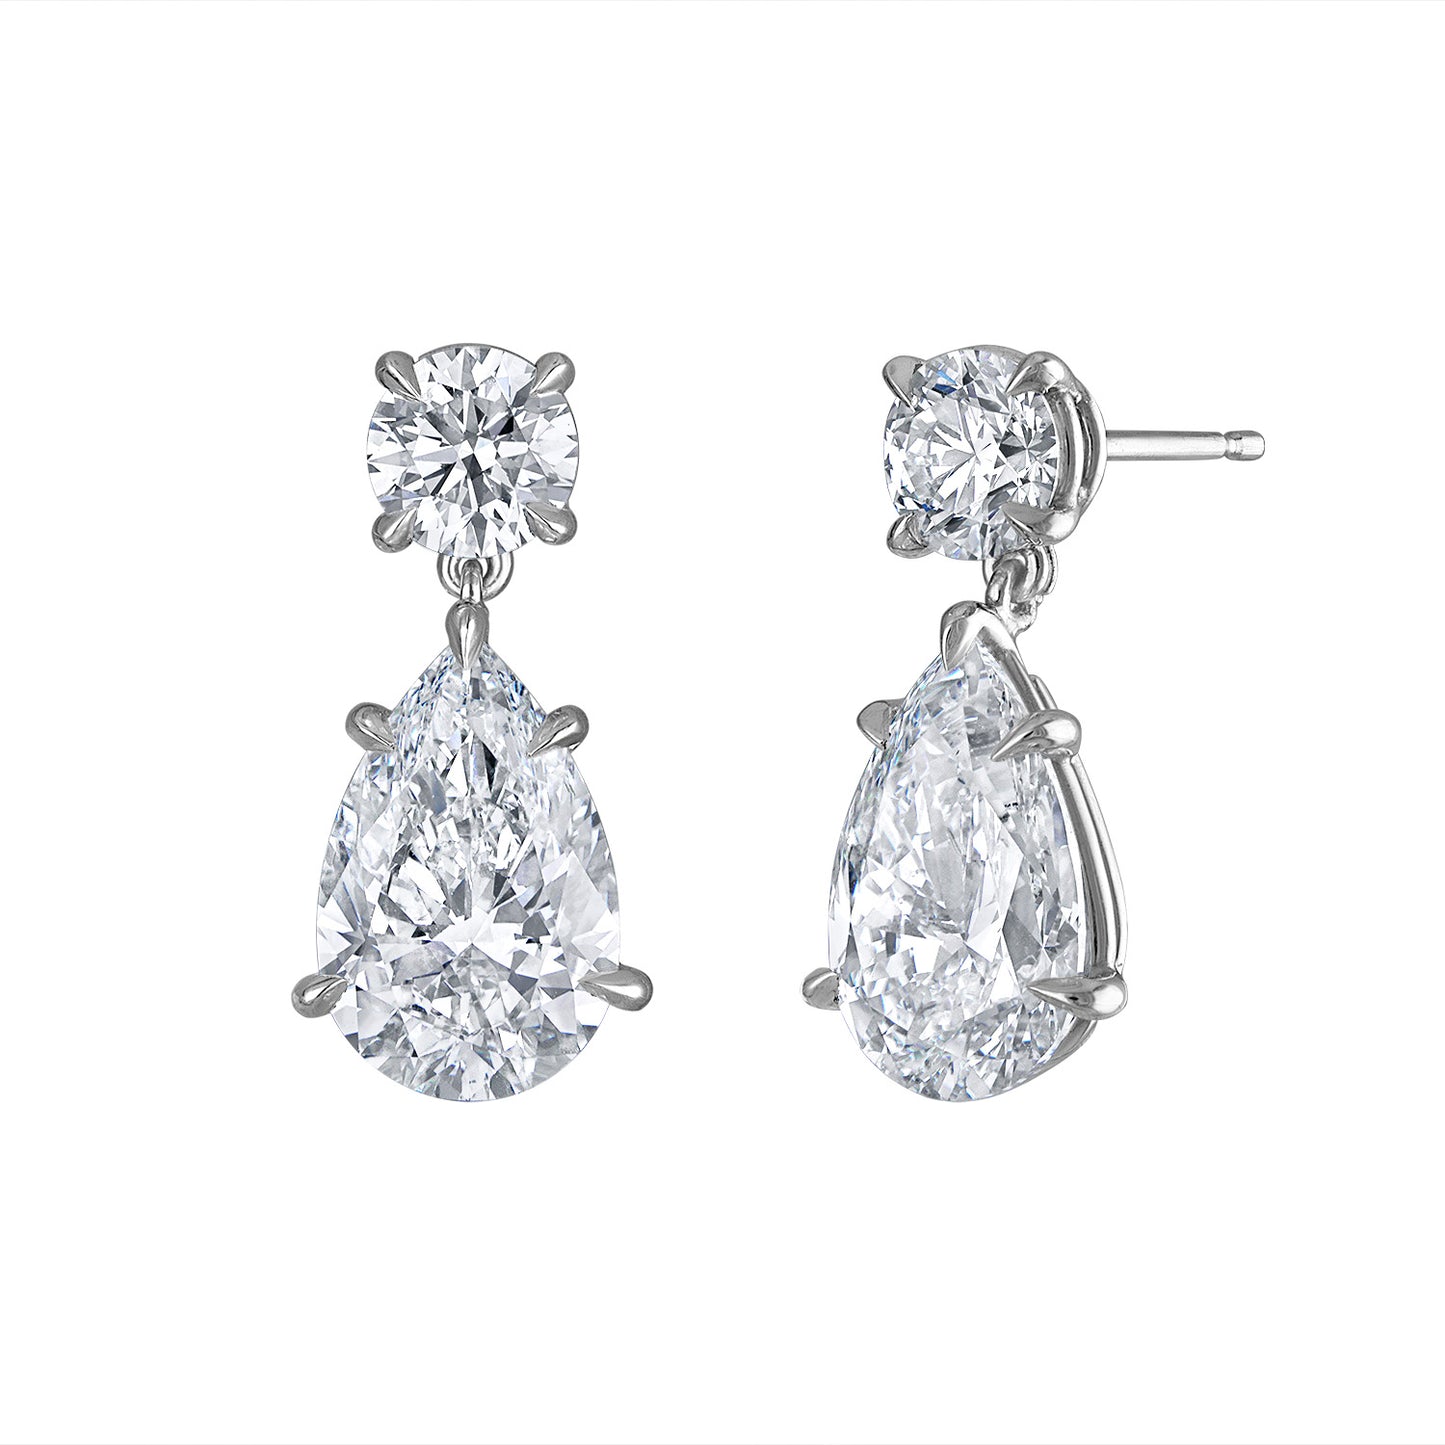 Front view of Round Brilliant and Pear Shape Diamond Drop Earrings in platinum, featuring two round brilliant cut diamonds totaling 1.01 carats and pear shape diamonds totaling 4.84 carats. Handmade in New York by Susan Kottemann.